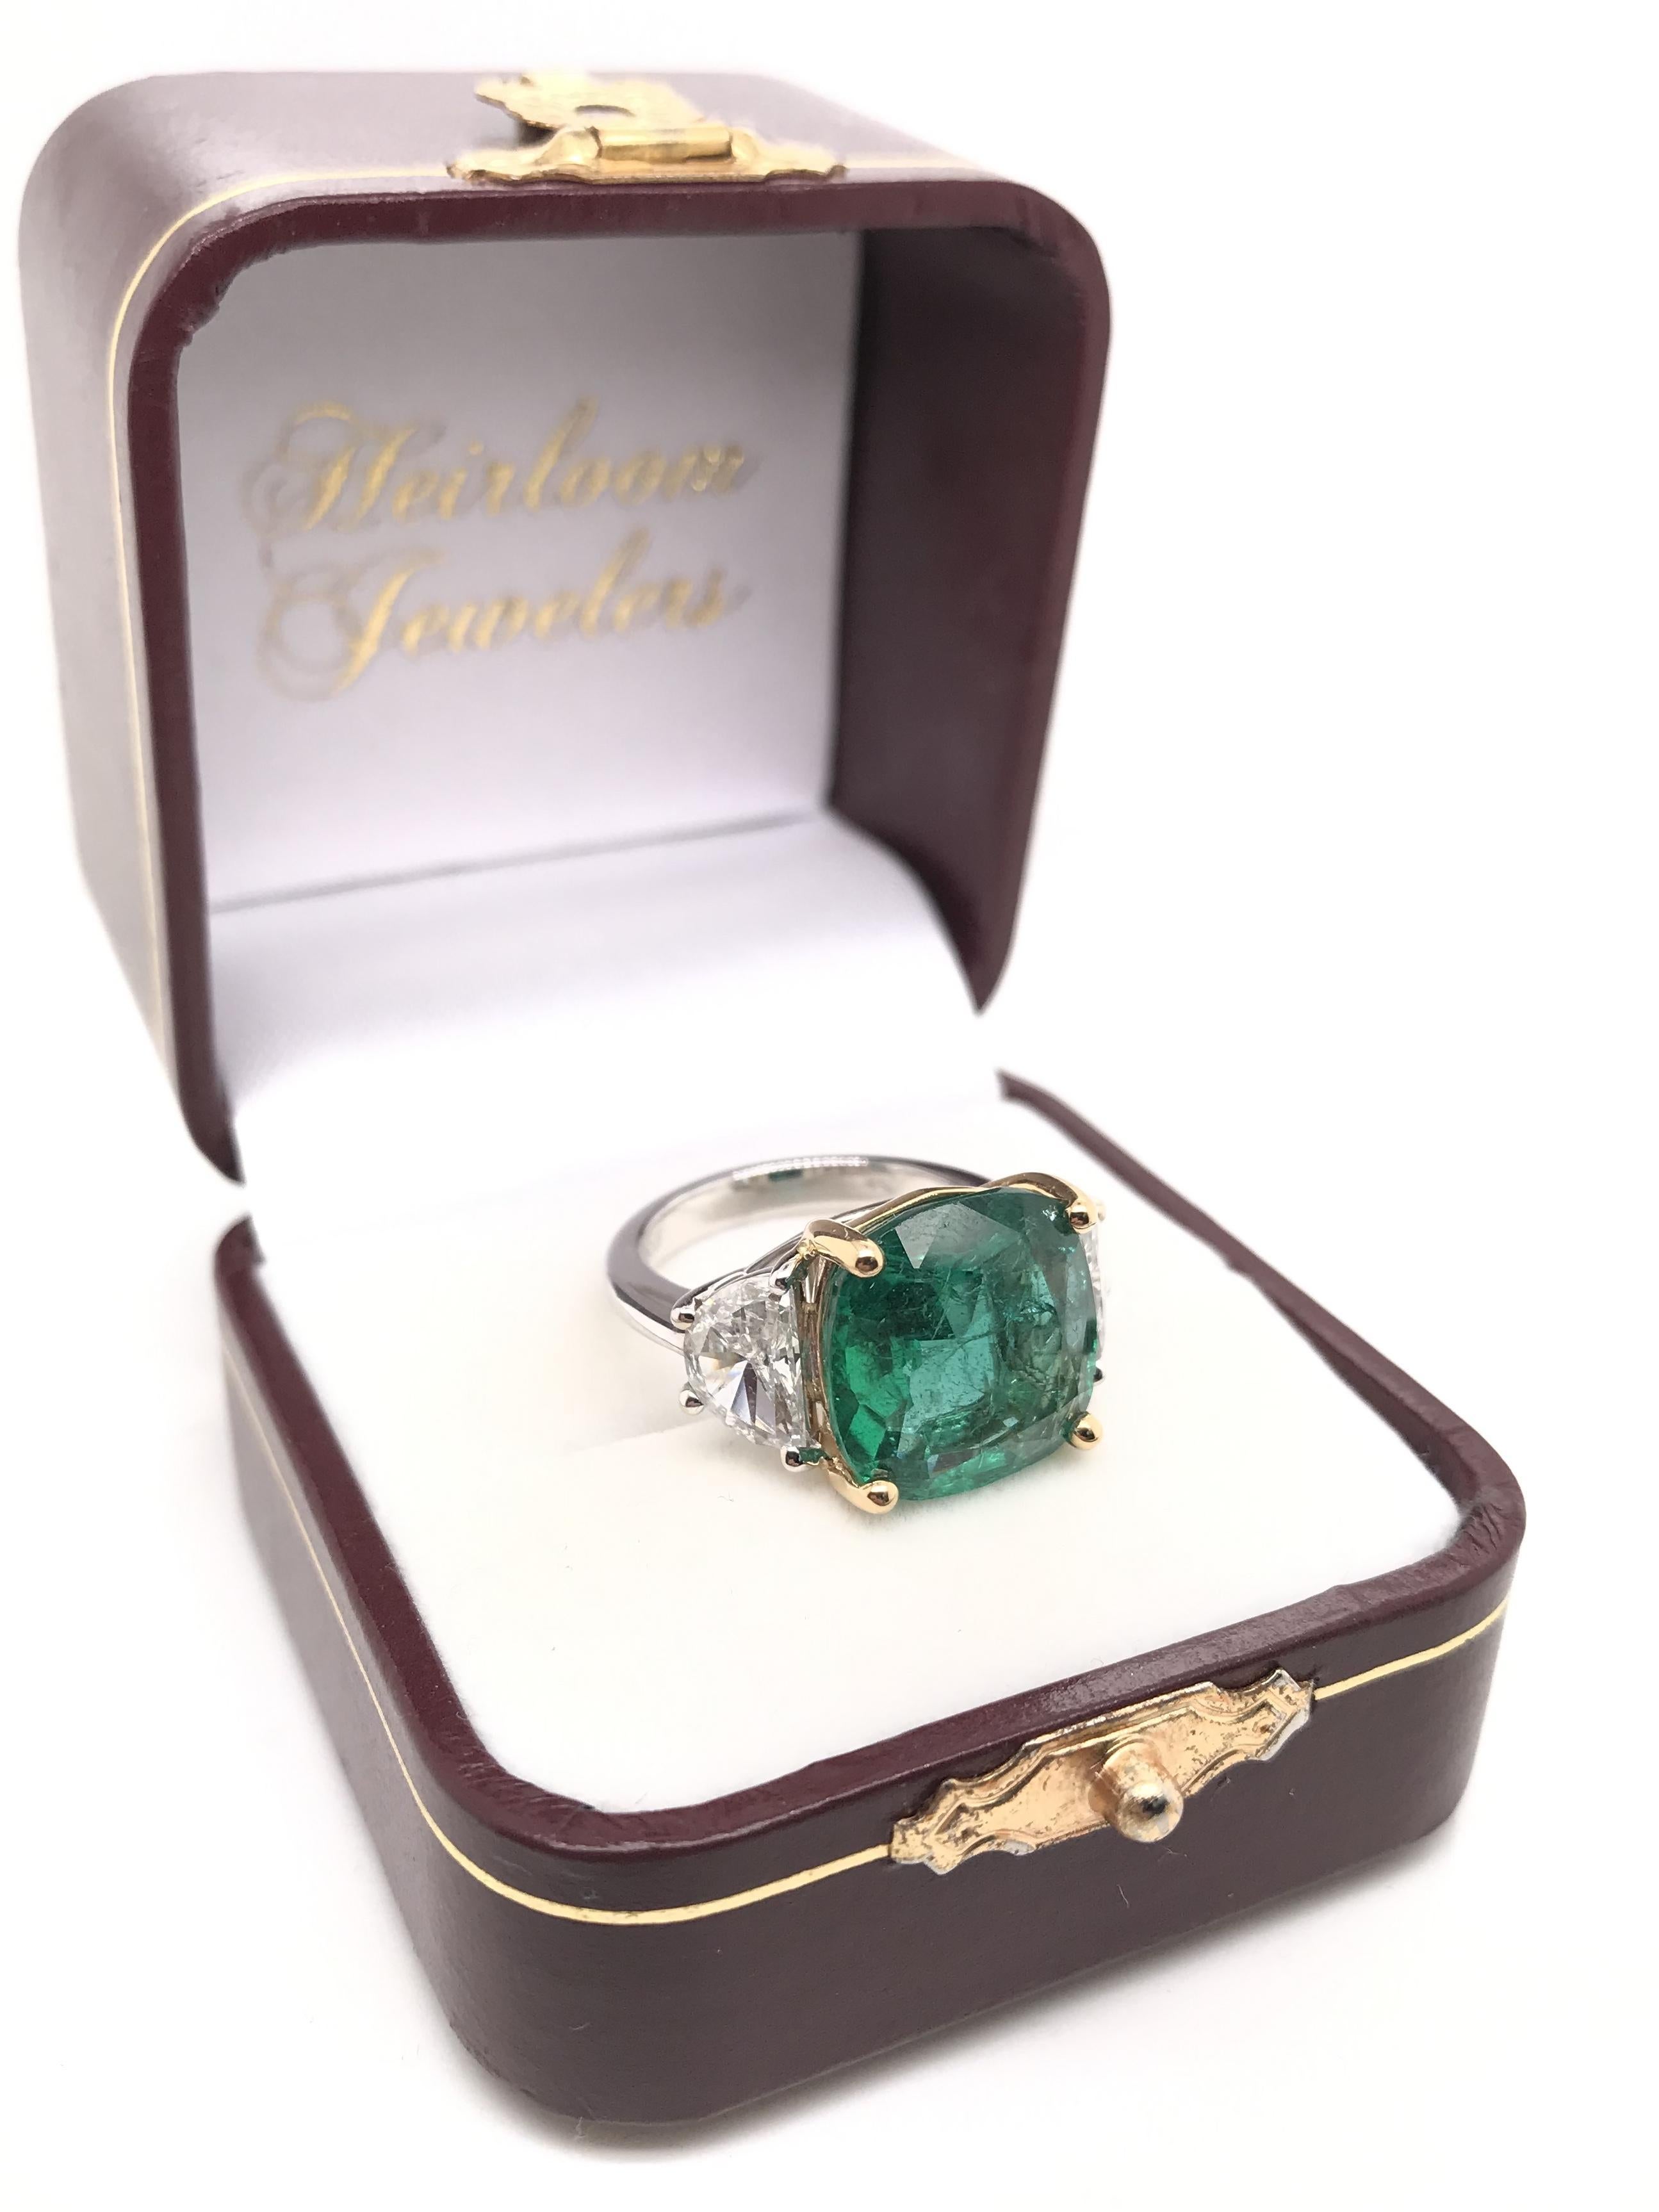 Contemporary Estate 7.88 Carat Emerald and Diamond Ring For Sale 10